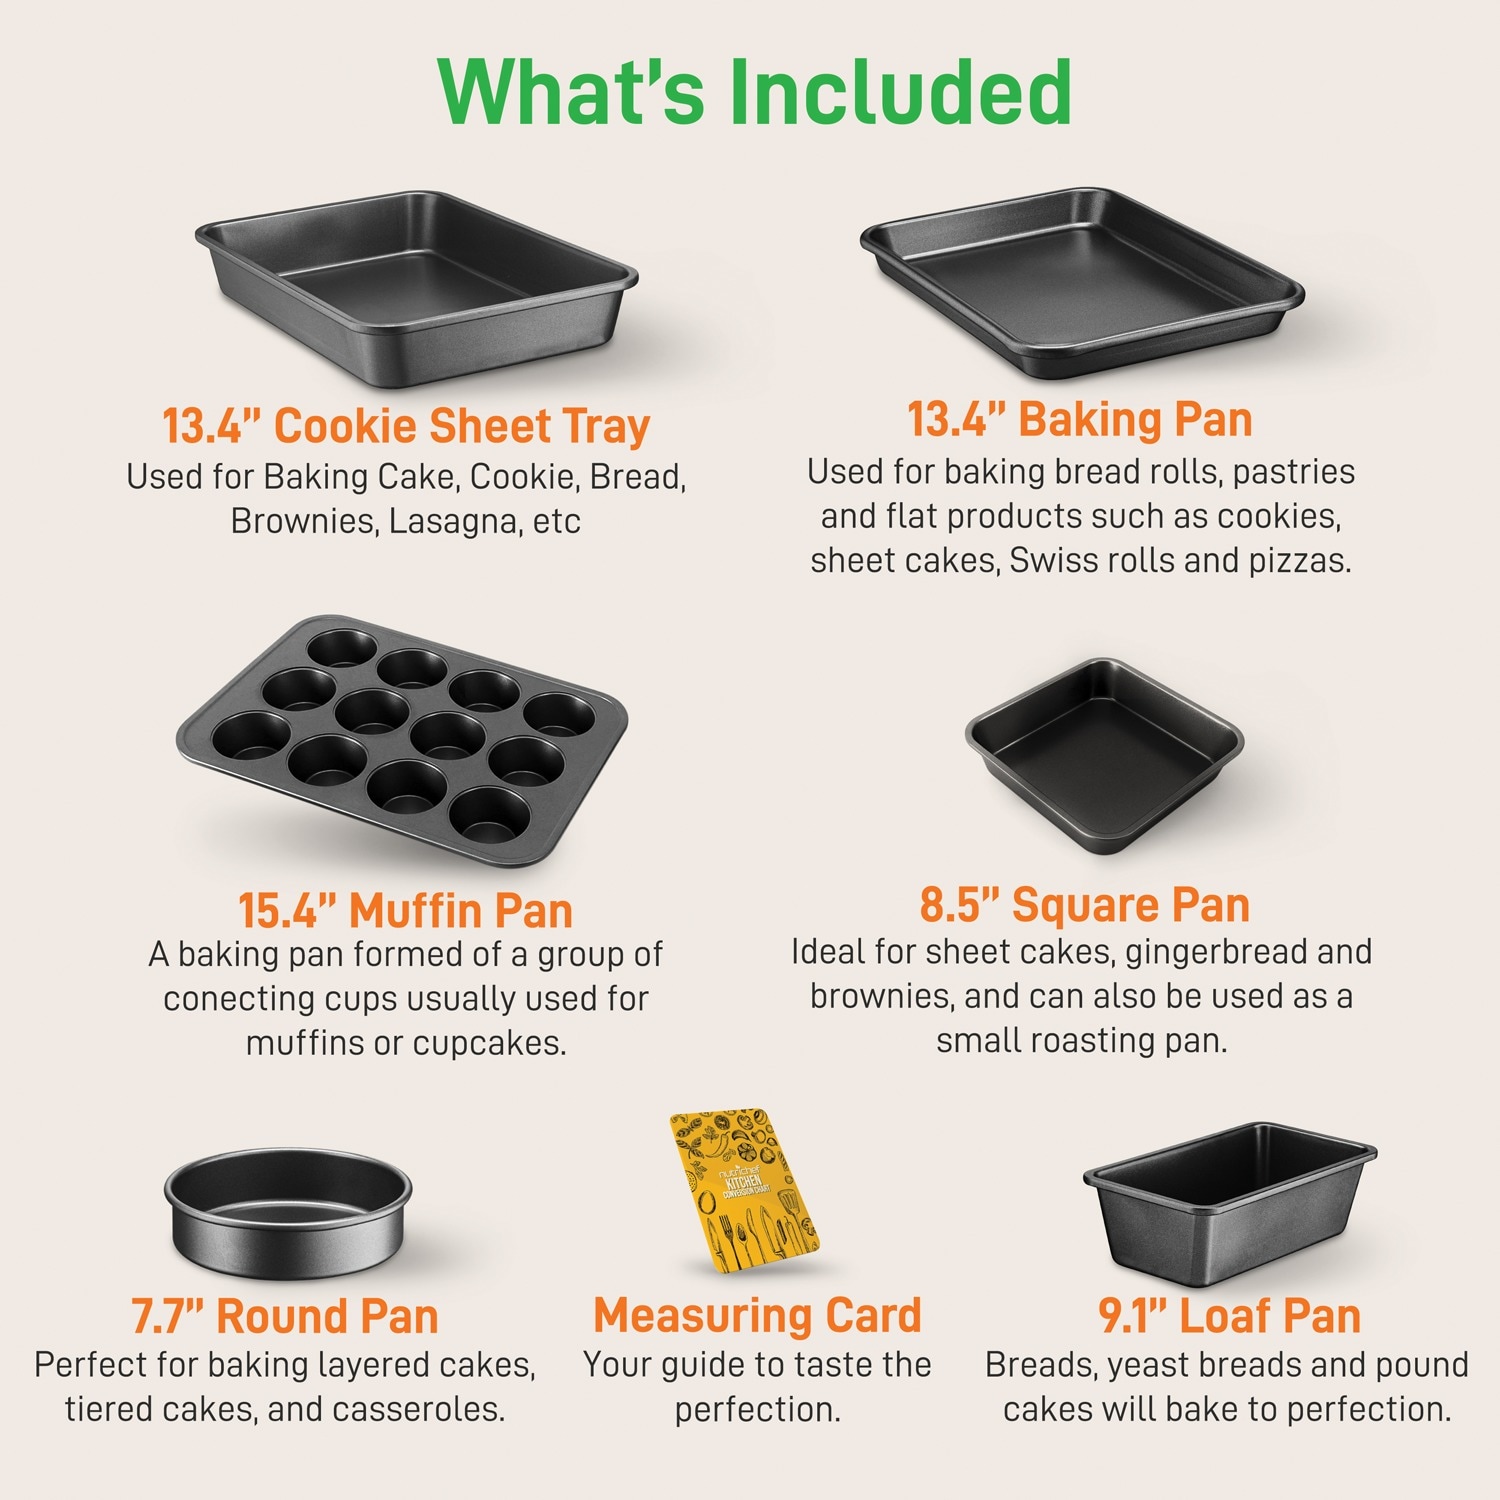 NutriChef Non-Stick Black Baking Pans - 6 Piece Steel Bakeware Set -  Dishwasher Safe - Professional Quality in the Bakeware department at